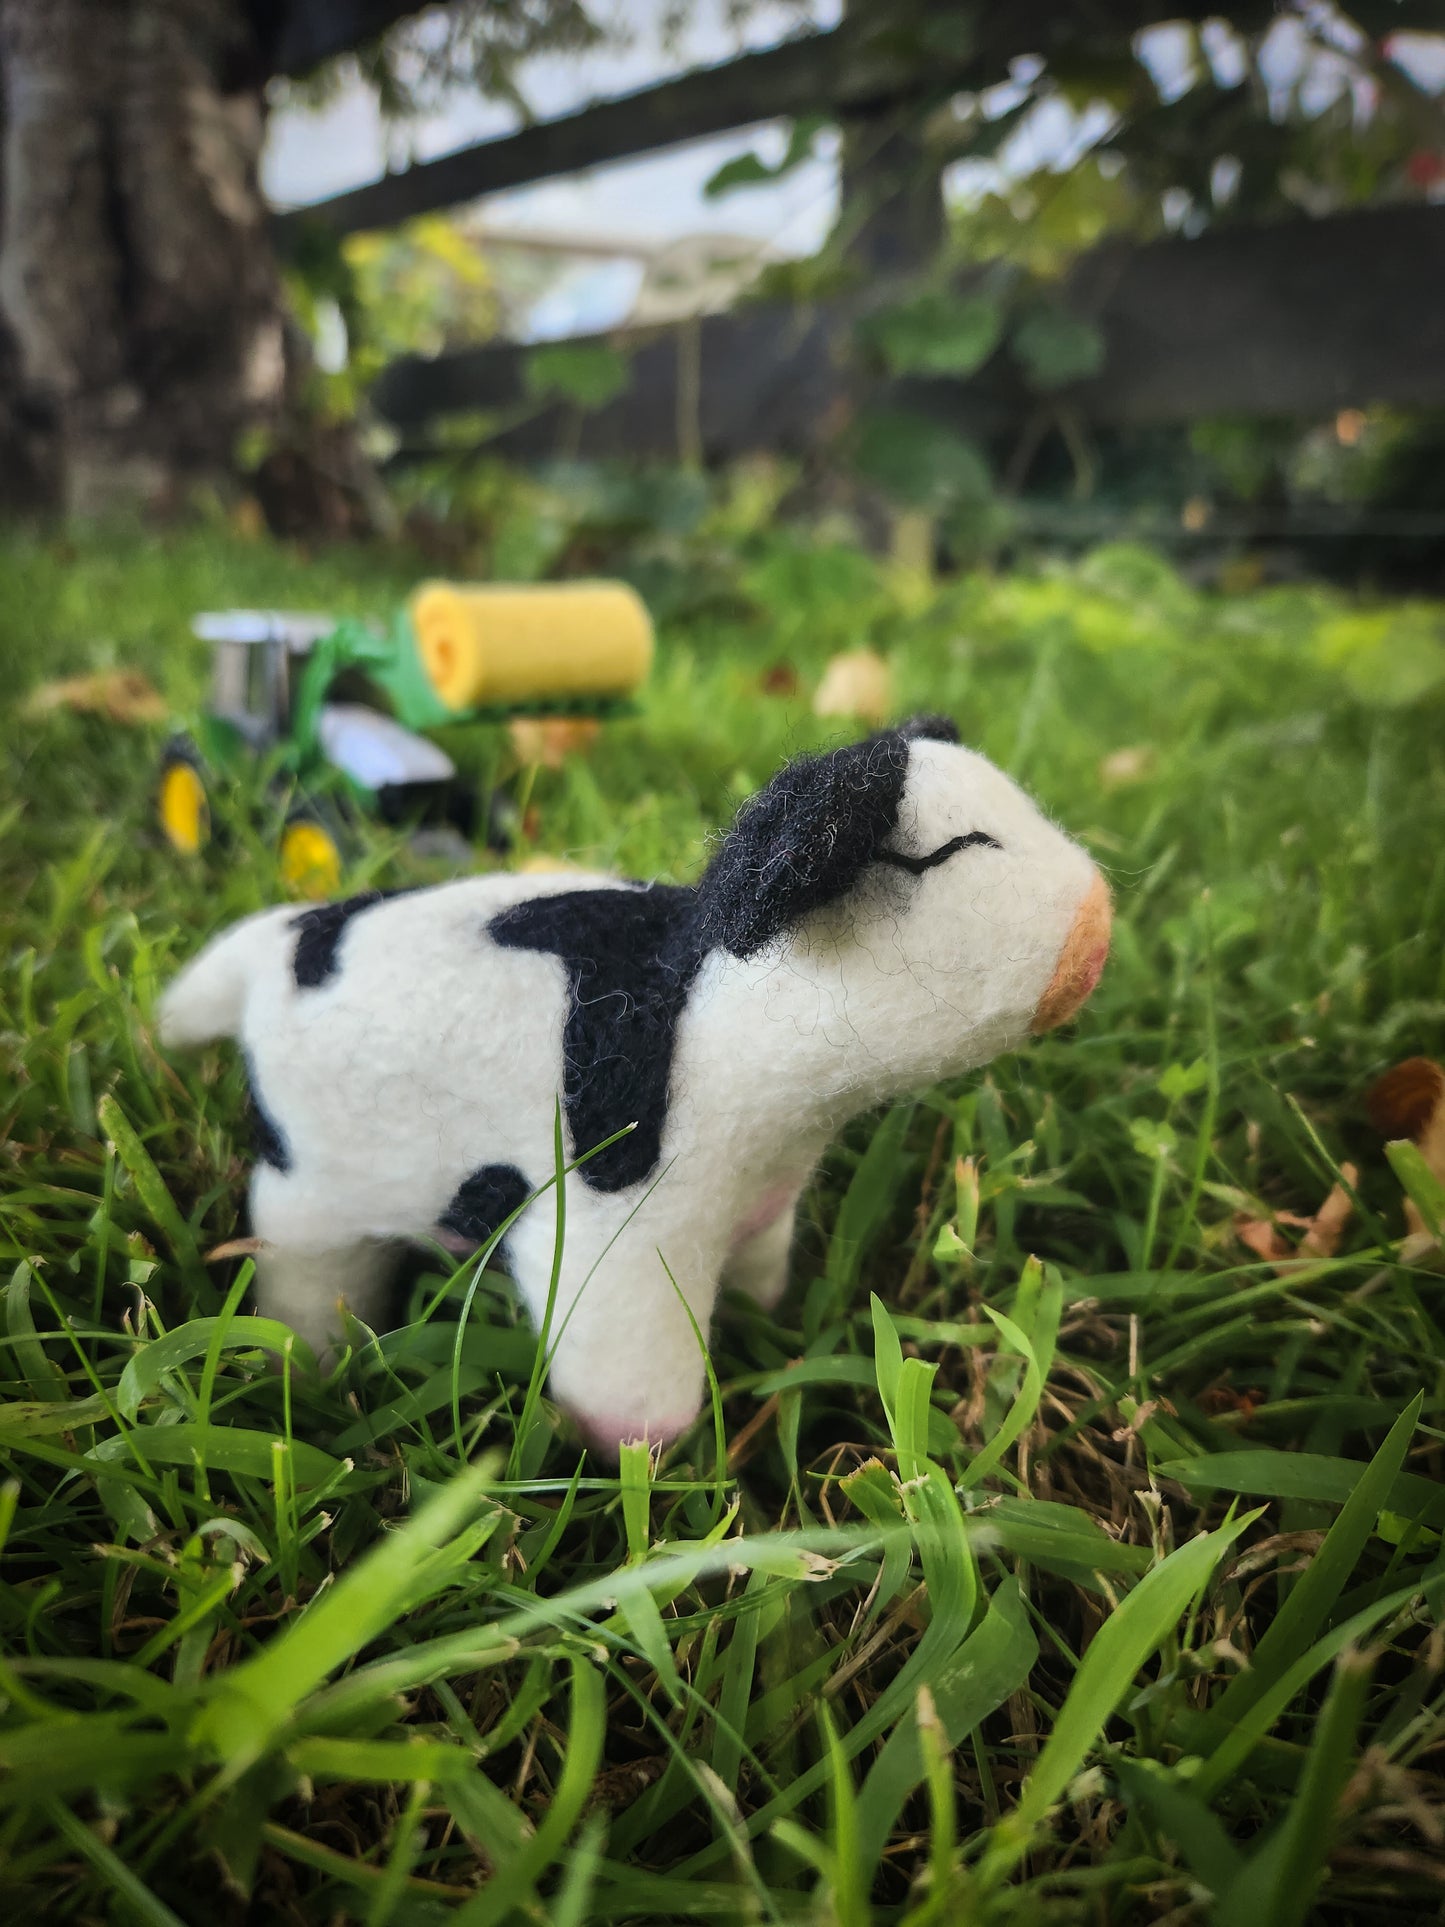 Candice the Calf - Felted Cow Toy in grass paddock with green toy tractor